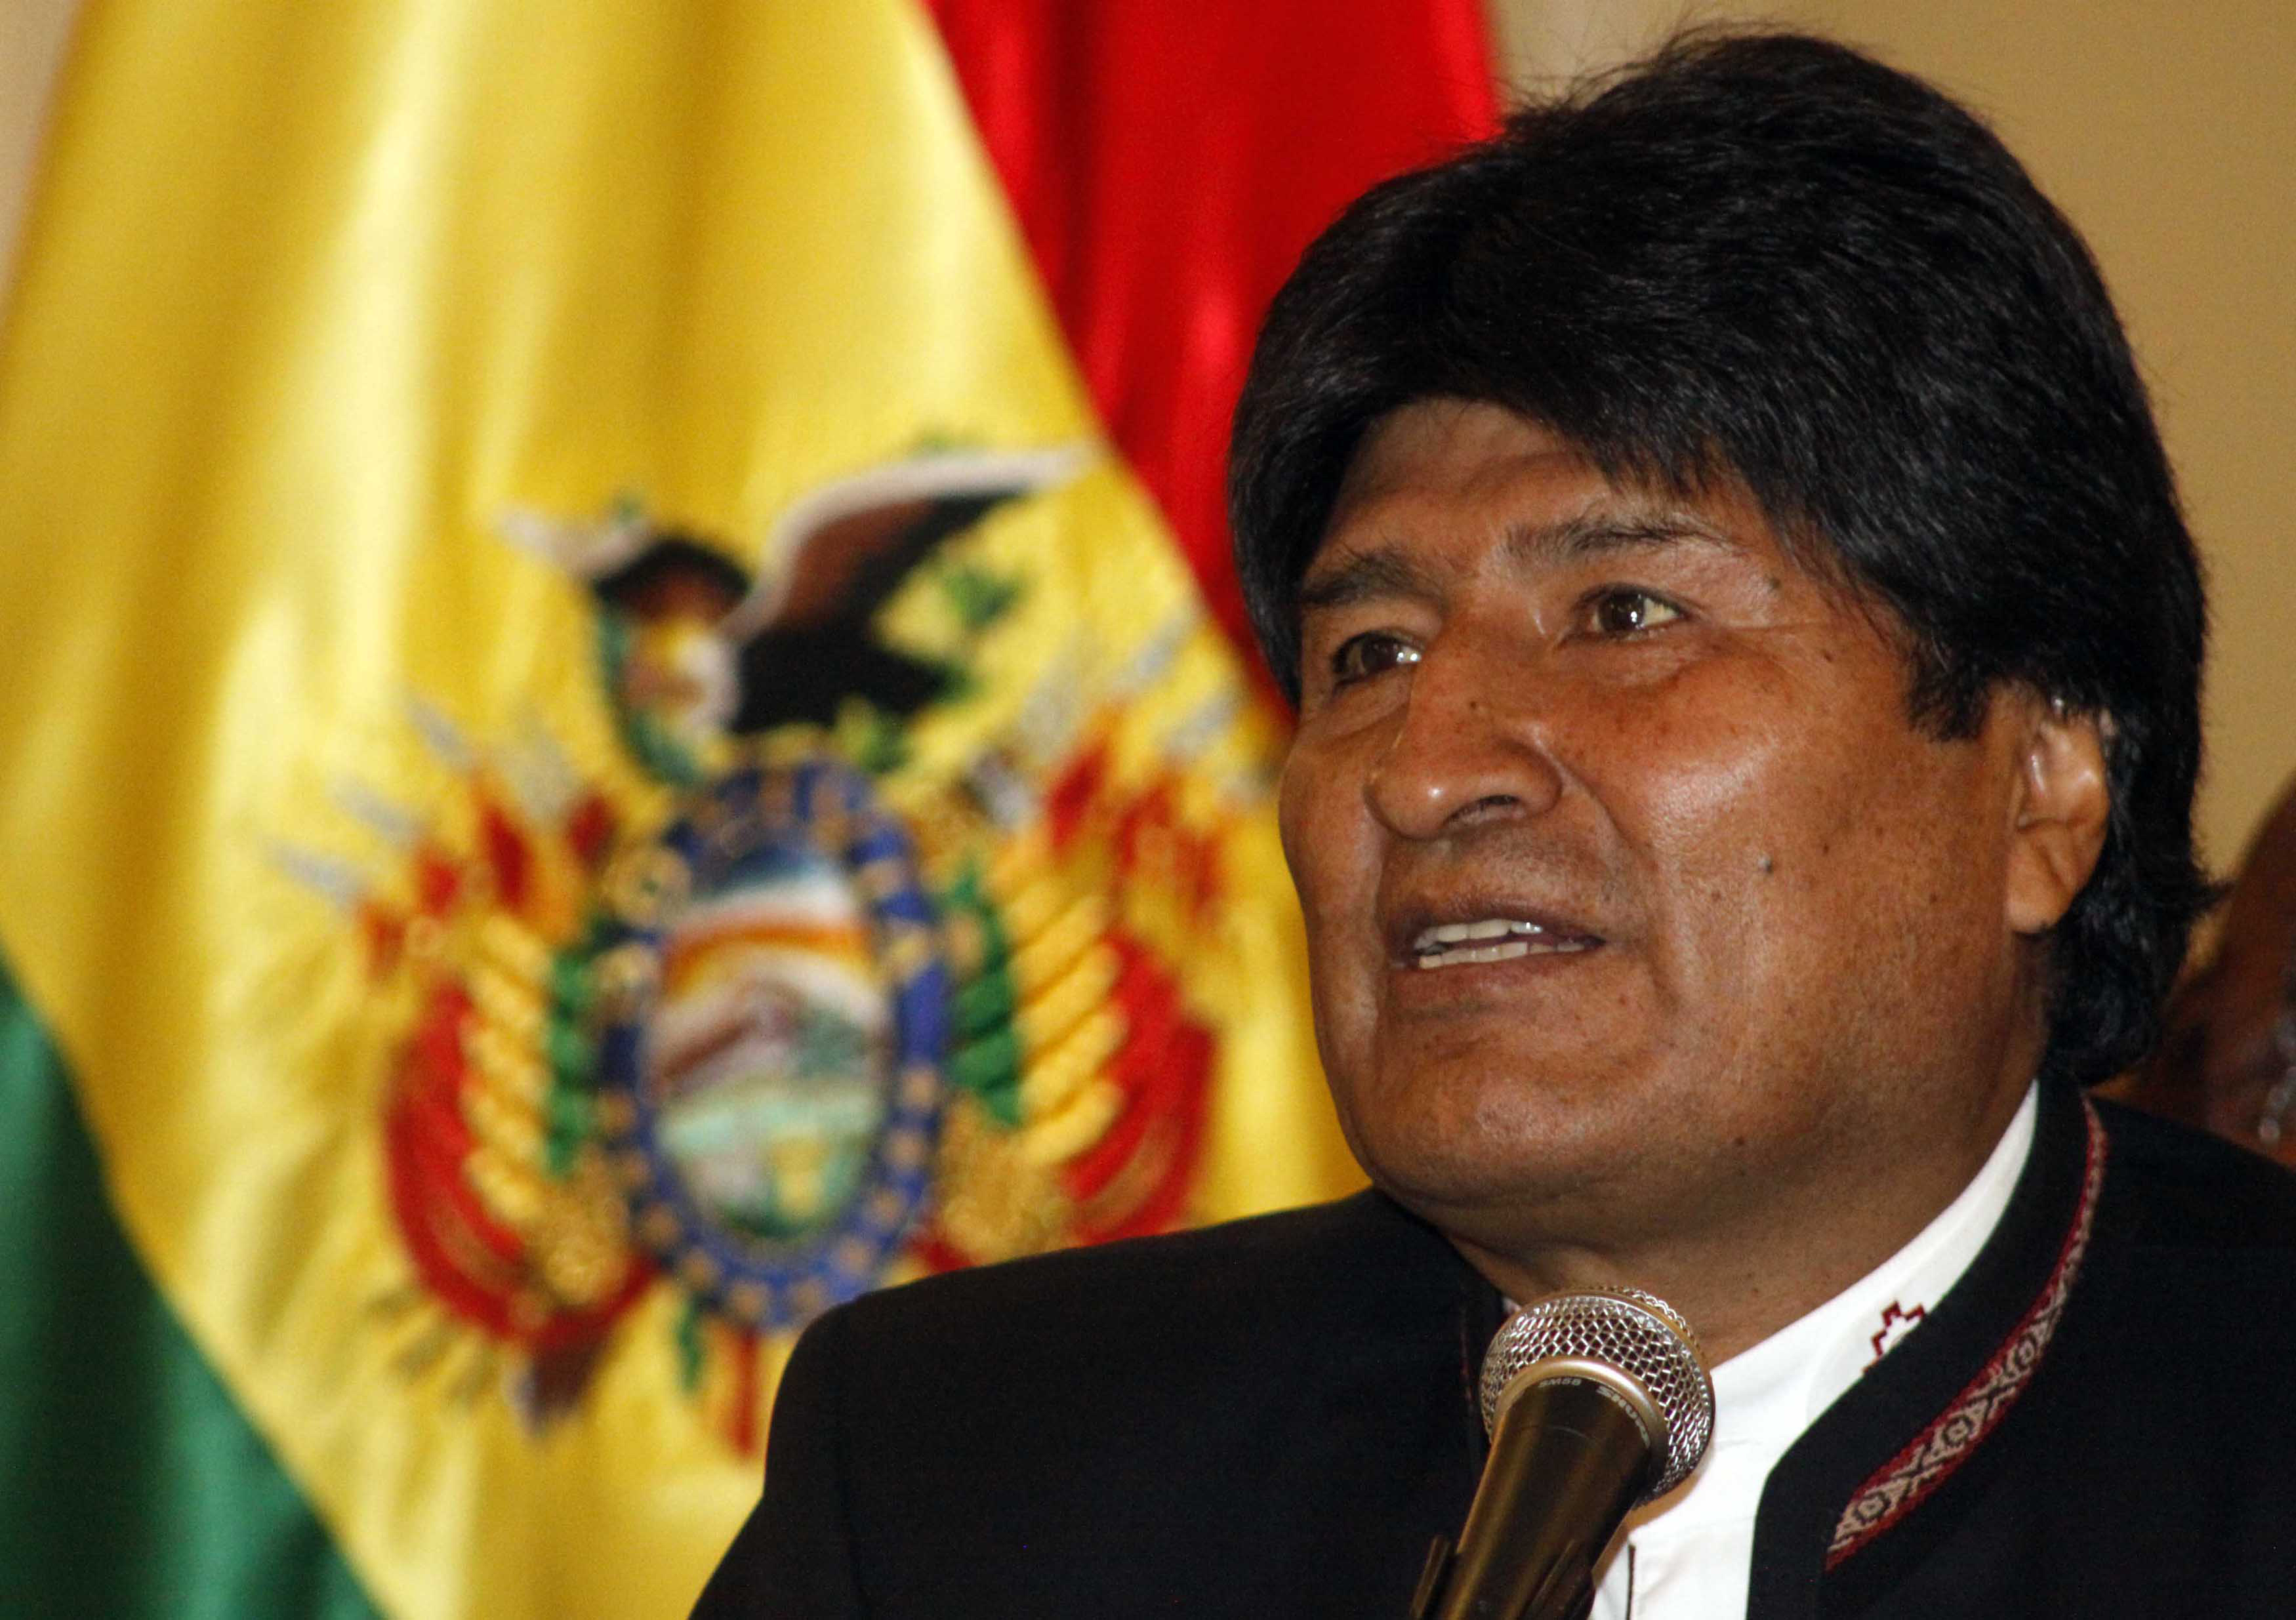 Evo Morales recalled the work of the only woman in Che's troop, Tamara Bunke.